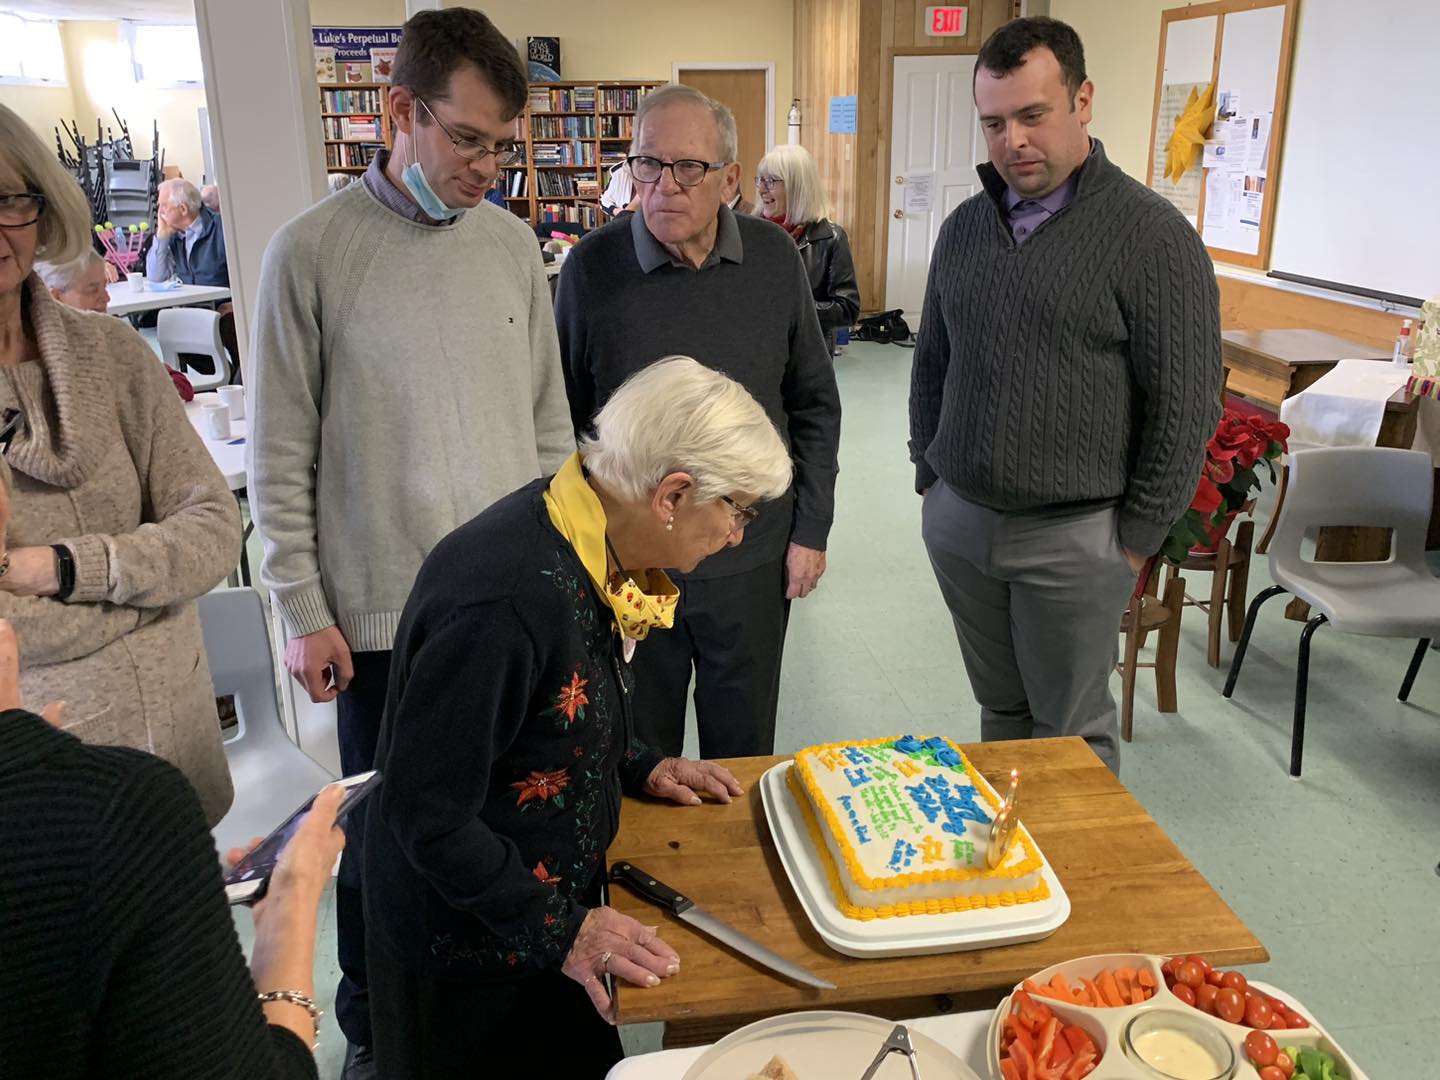 Sunday, January 29th, 2023 marked Hilda's 99th birthday. A celebration with family and friends was held at St. Luke's Church.